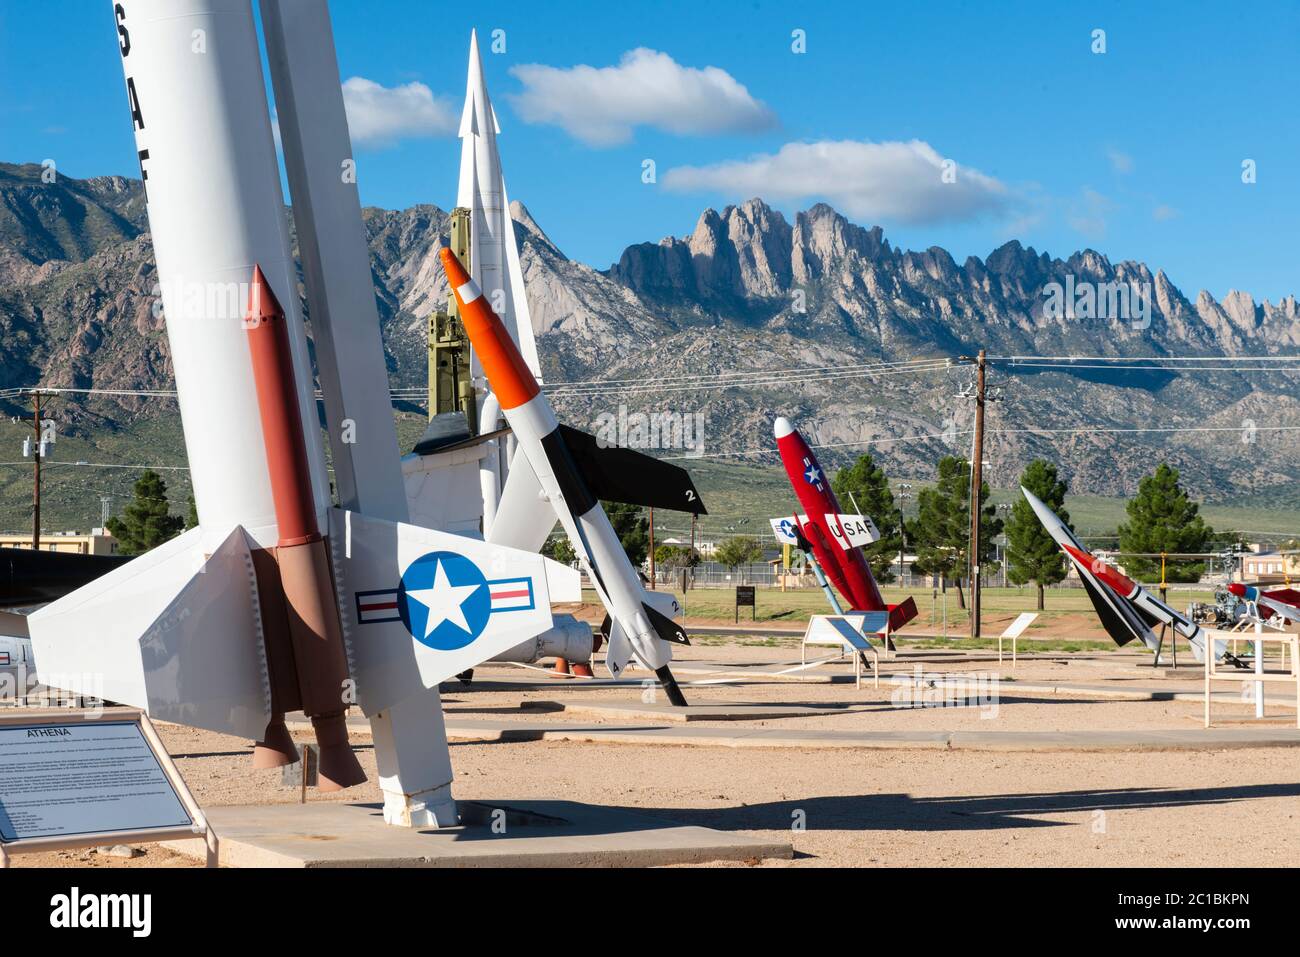 USA, Sud-Ovest, New Mexico, White Sands Missile Range Museum Foto Stock